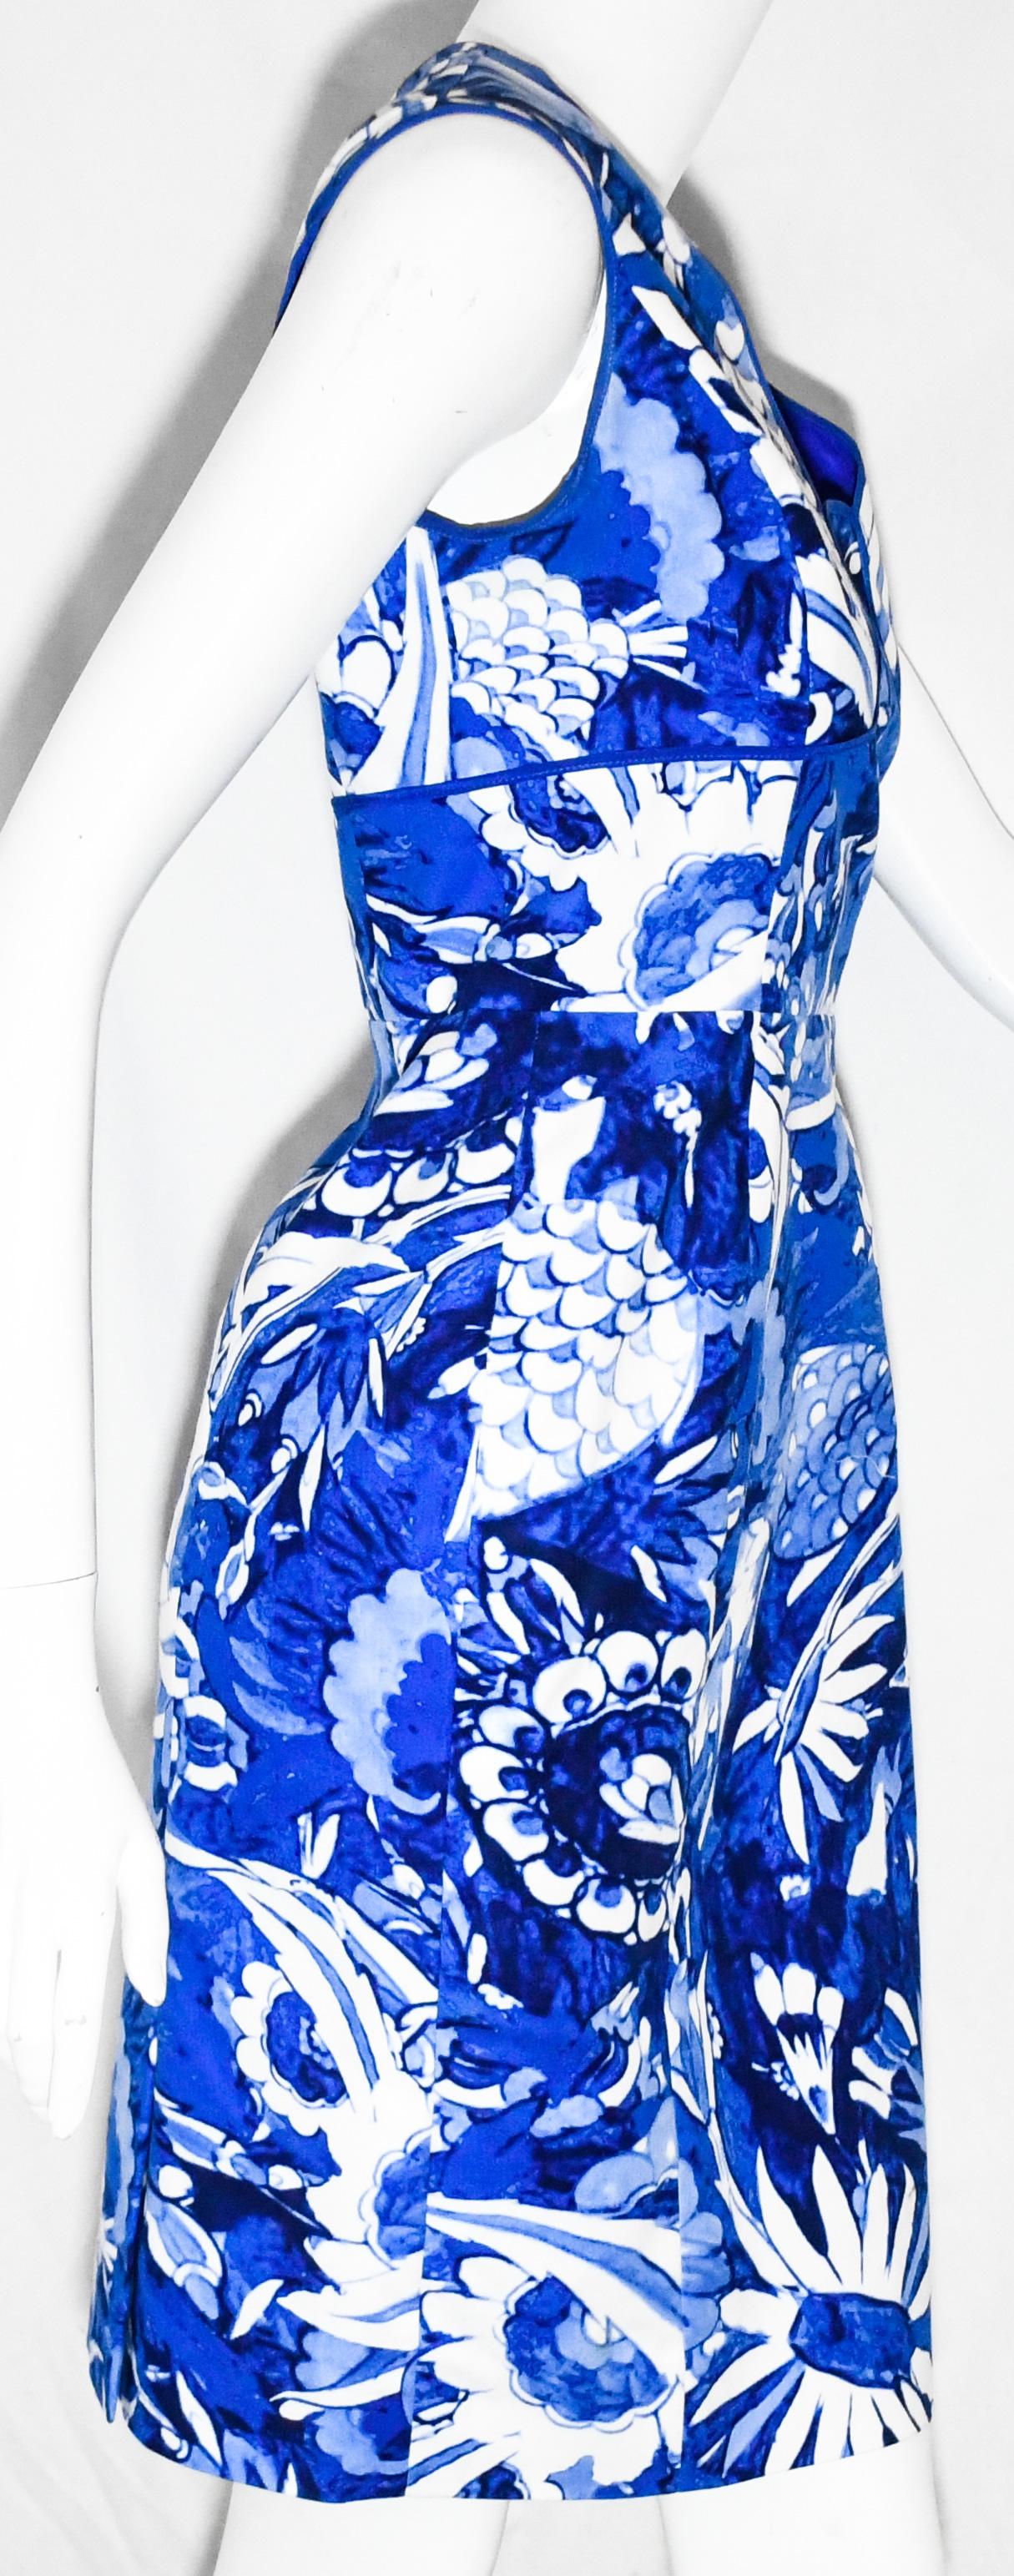 Oscar de la Renta white and blue  structured dress is printed with a traditional blue and white floral pattern that has been perfectly disjointed through slim vertical blue trim on the bodice.  This V neck dress is highlighted with the ever present